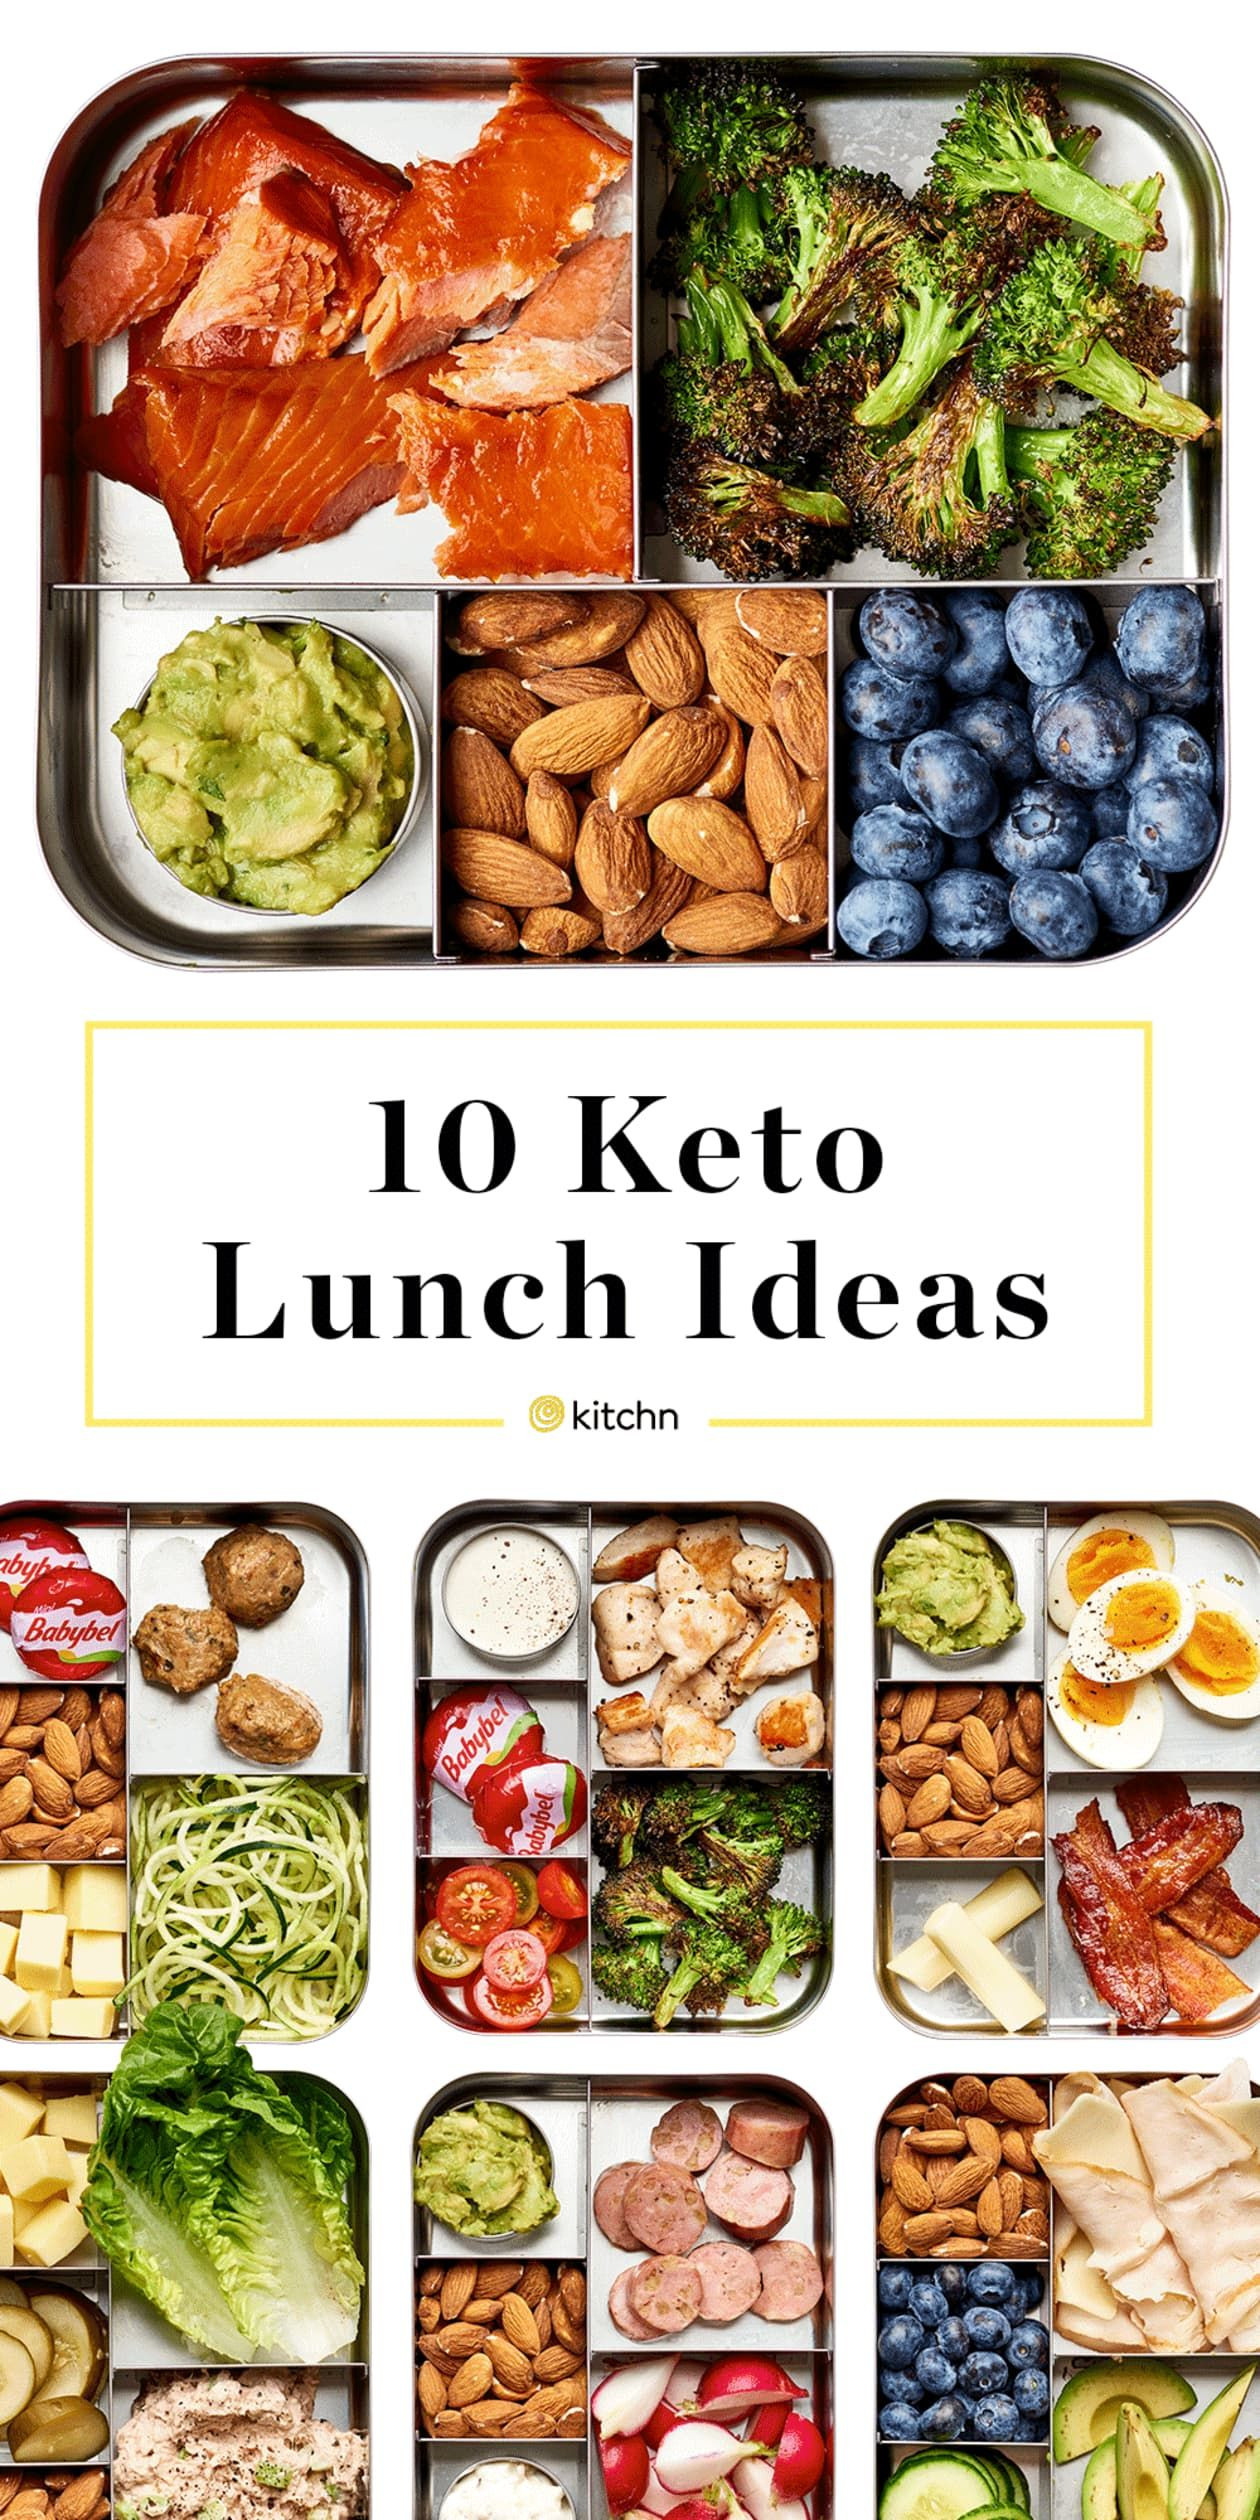 Clean Keto Lunches For Work
 10 Easy Ways to Pack a Keto Friendly Lunch